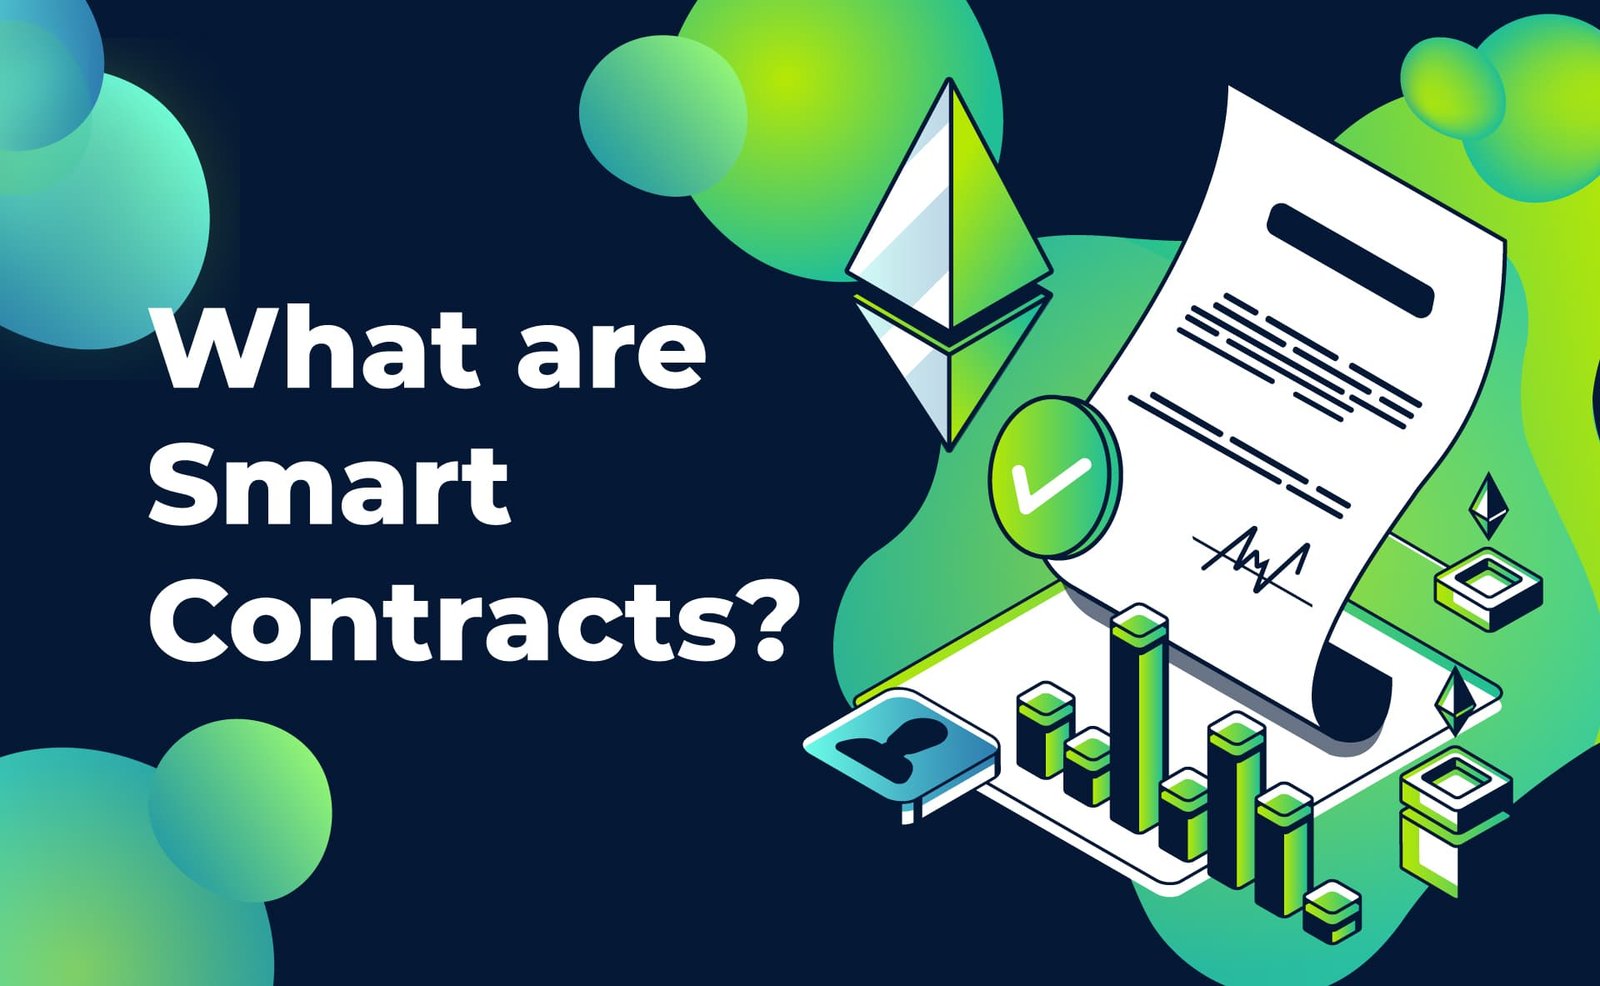 GREEN SMART CONTRACTS